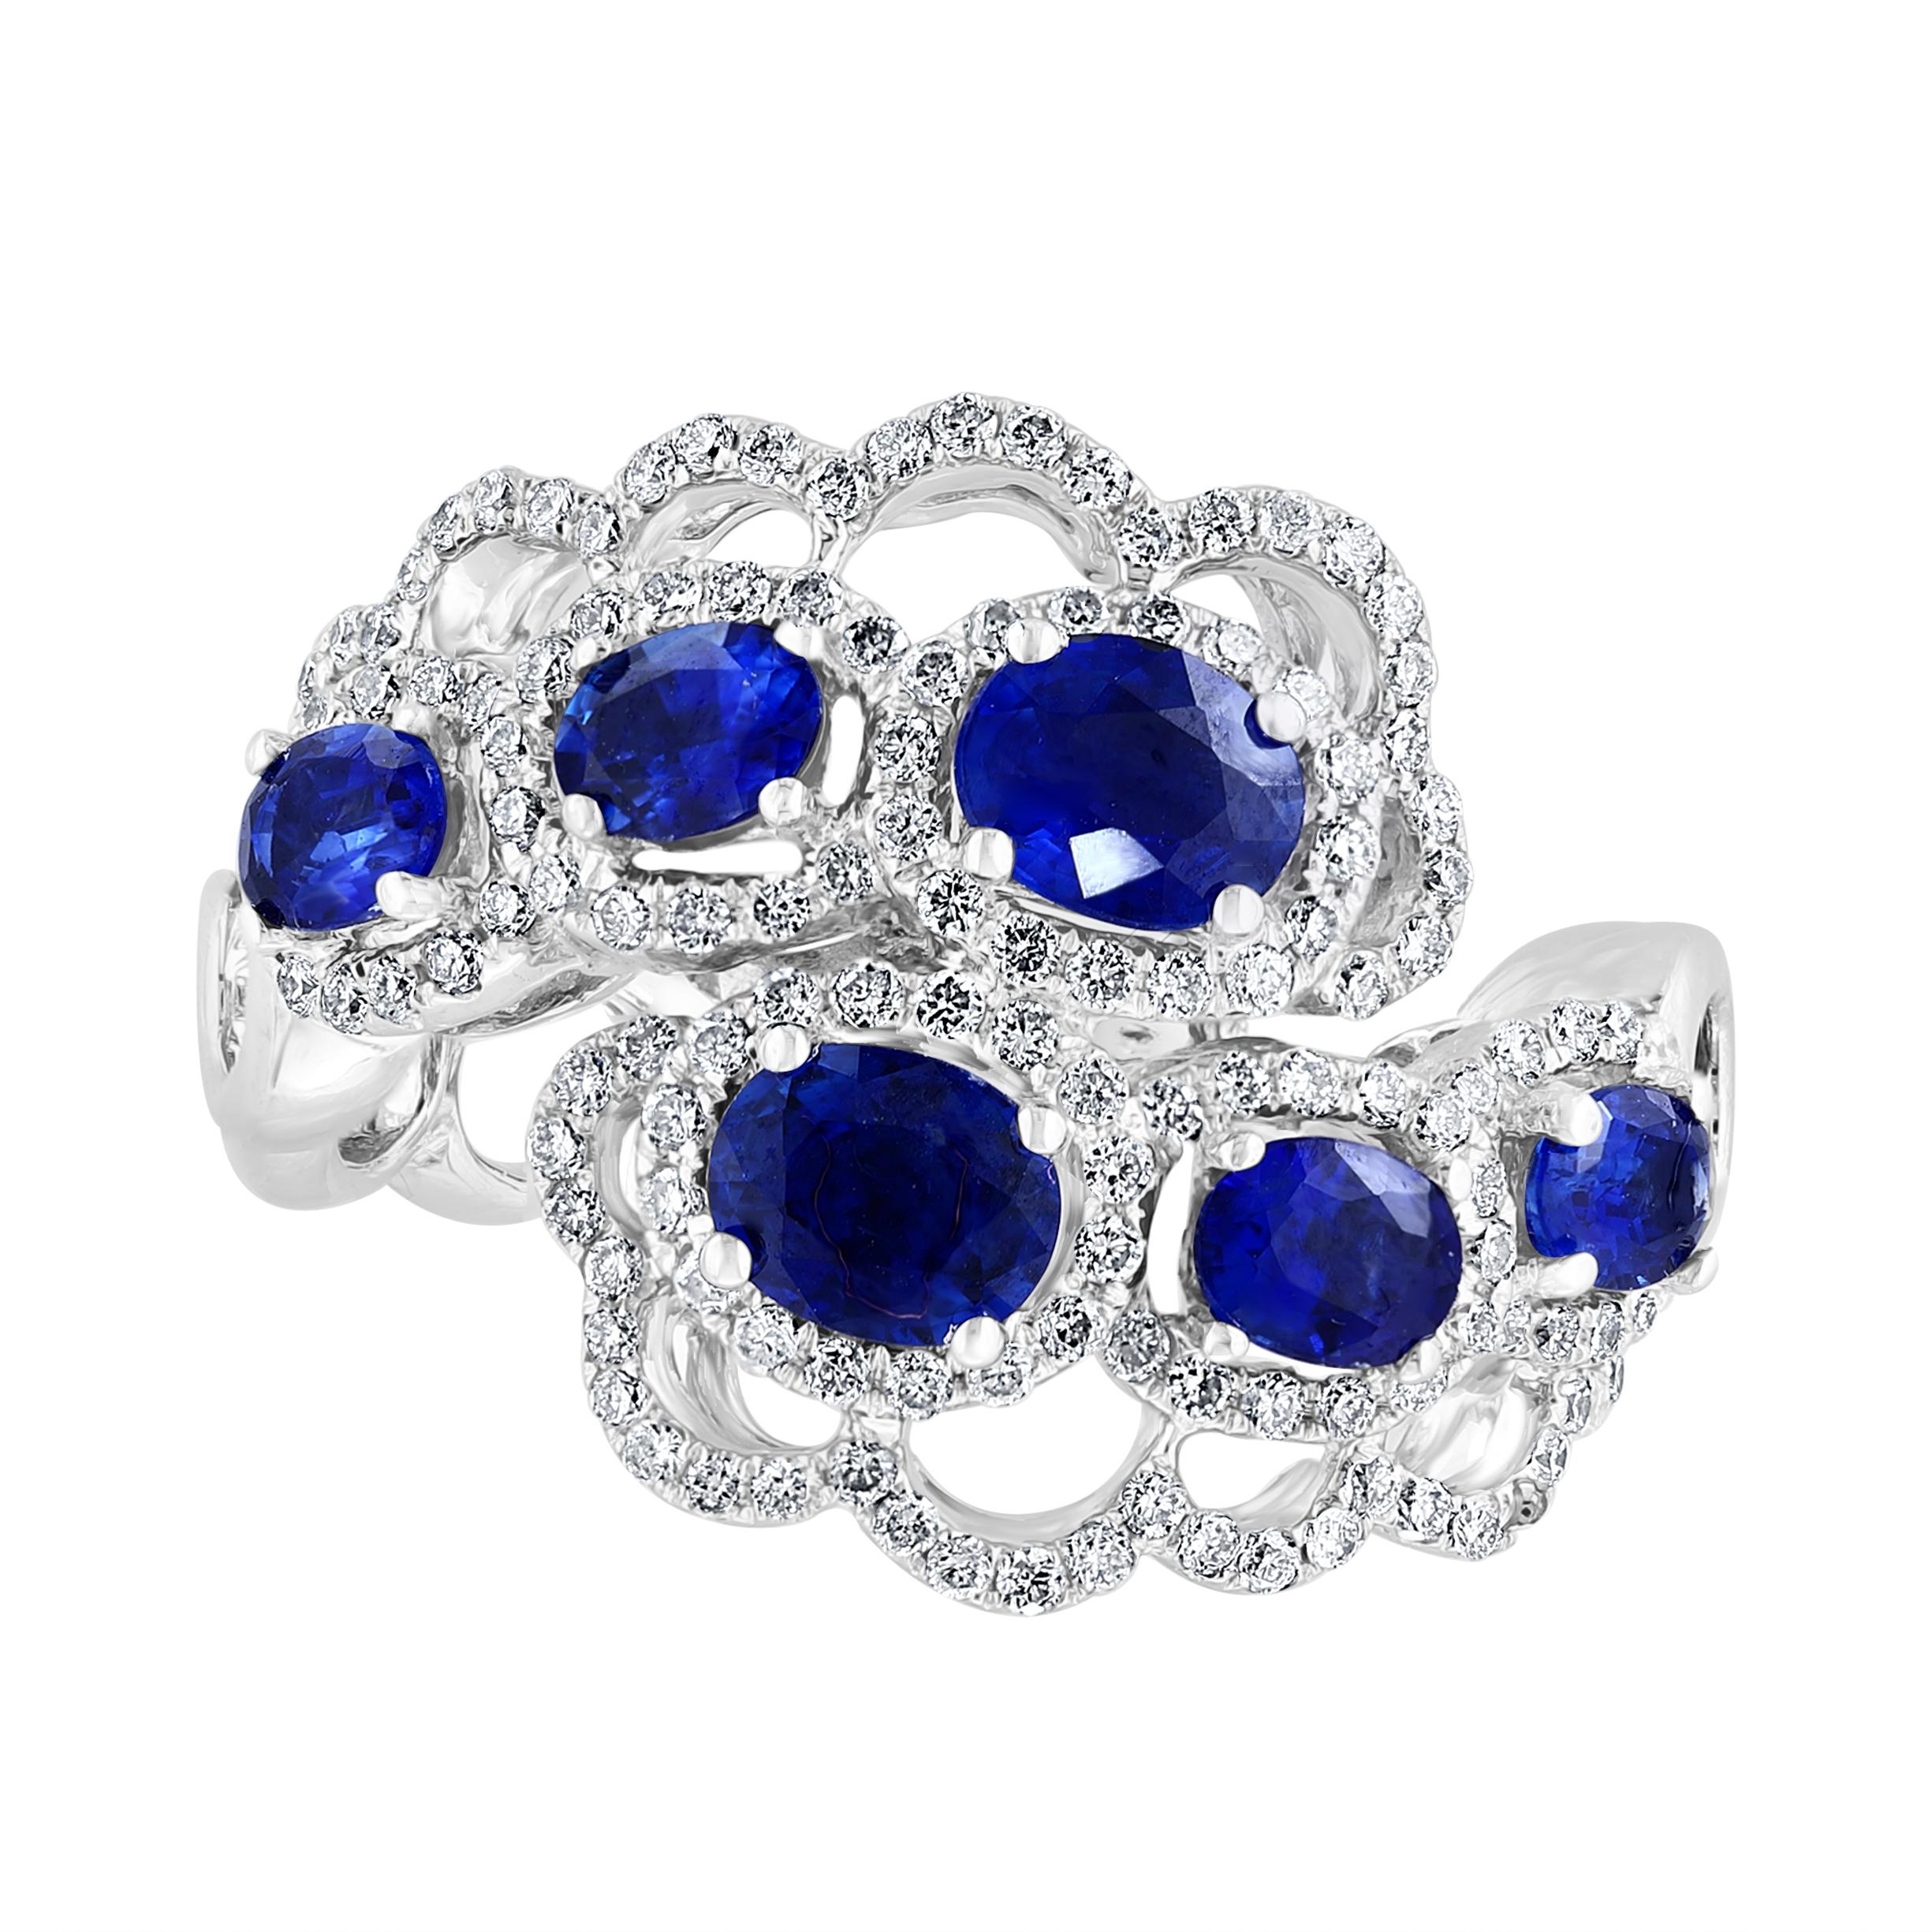 A fashionable and color-rich ring showcasing 6 blue sapphires, each surrounded by a brilliant diamond halo. Set in an openwork design shank. Blue sapphires weigh 1.60 carats total; accent diamonds weigh 0.56 carats total. Made in 18k white gold.